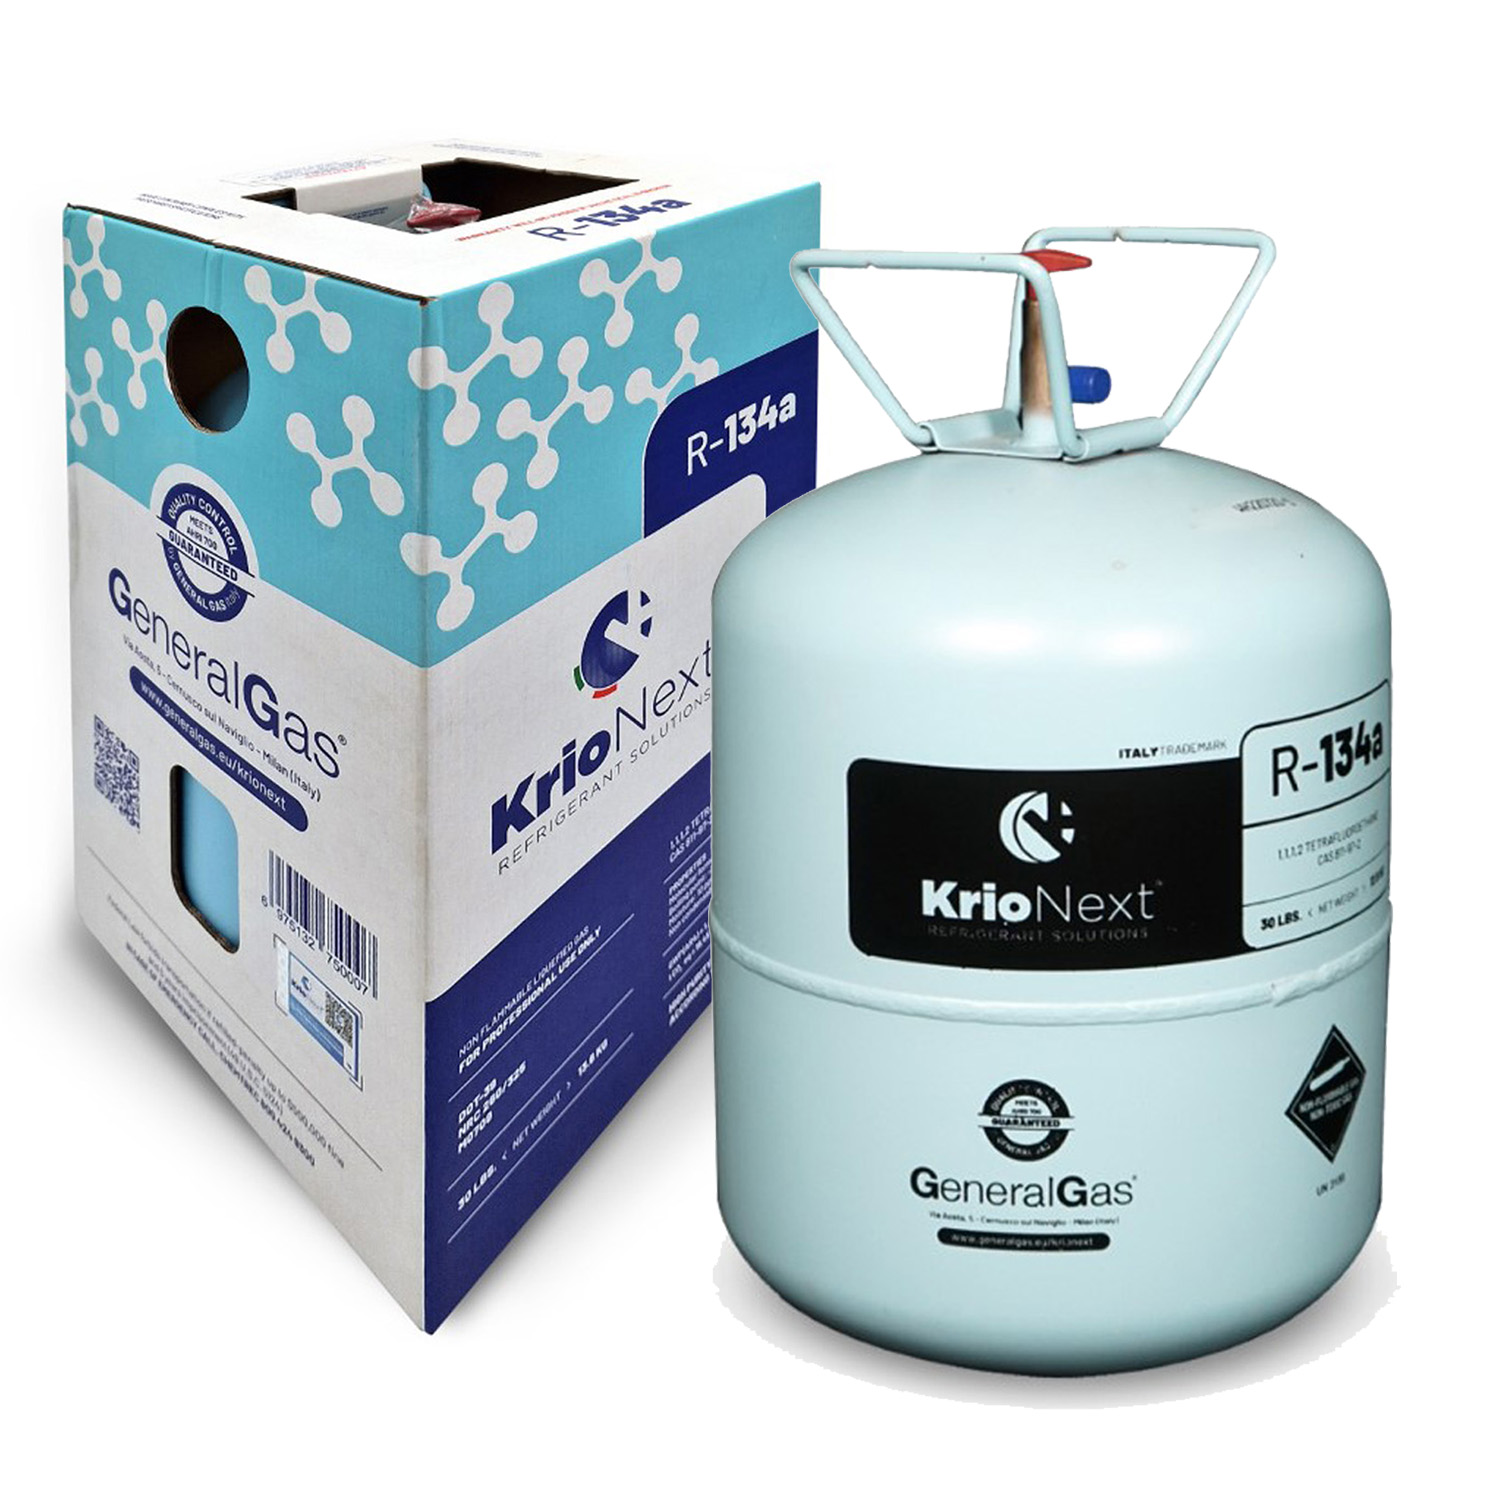 R134a KrioNext® 134A in DOT39 non-refillable cylinder 13,77 Lt/22 Bar - 13,6 Kg/30 lb - Quality meets AHRI700-2019 USA standard (guaranteed by lab of GeneralGas Zhejiang Co. LTD.)